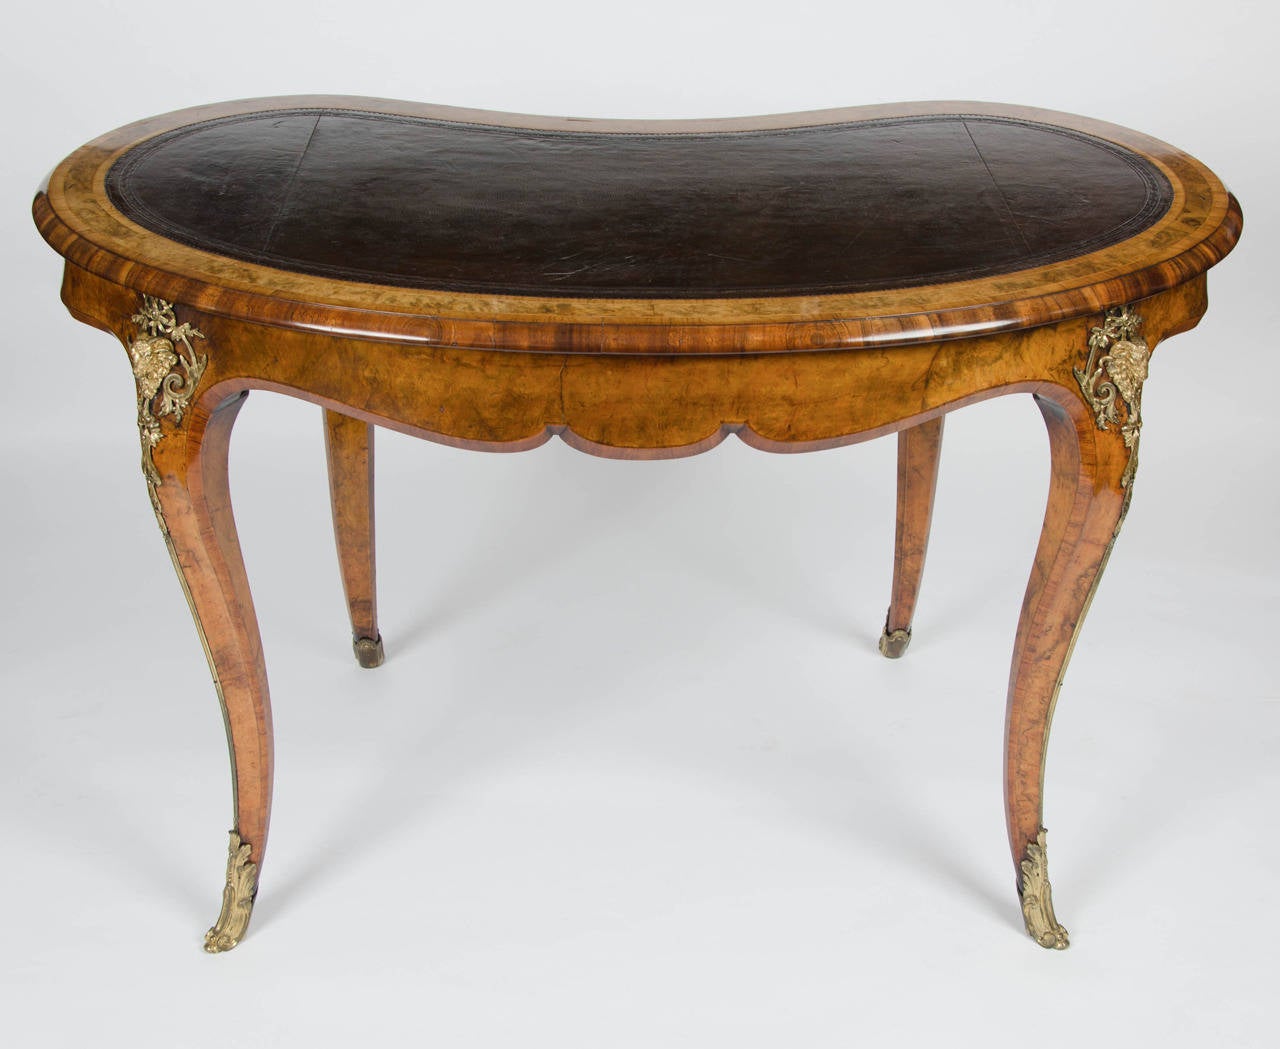 A wonderful kidney shaped writing table with single drawer stamped by Gillow & Co. 
The finely figured burr walnut crossbanded throughout and with fabulous rams head ormolu mounts. The top with original inset leather.
Of typical fabulous quality